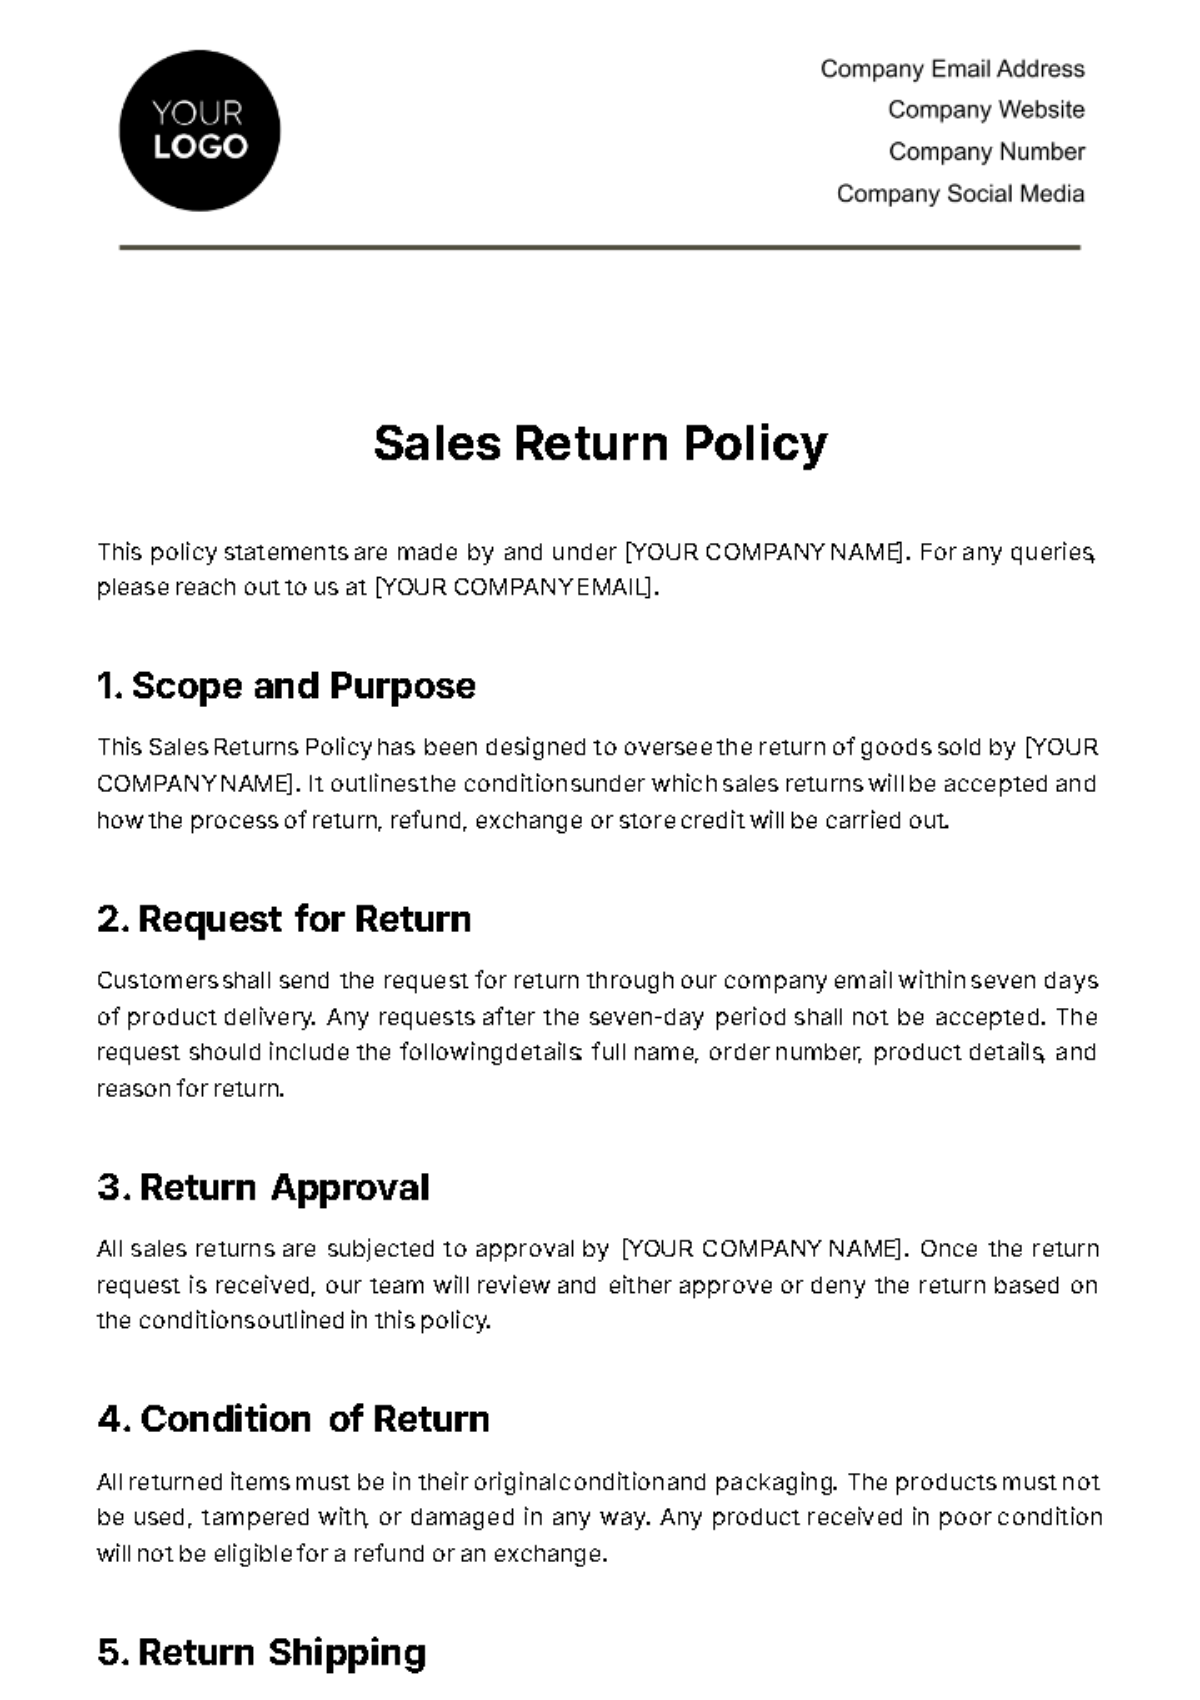 Free Sales Returns Policy Template